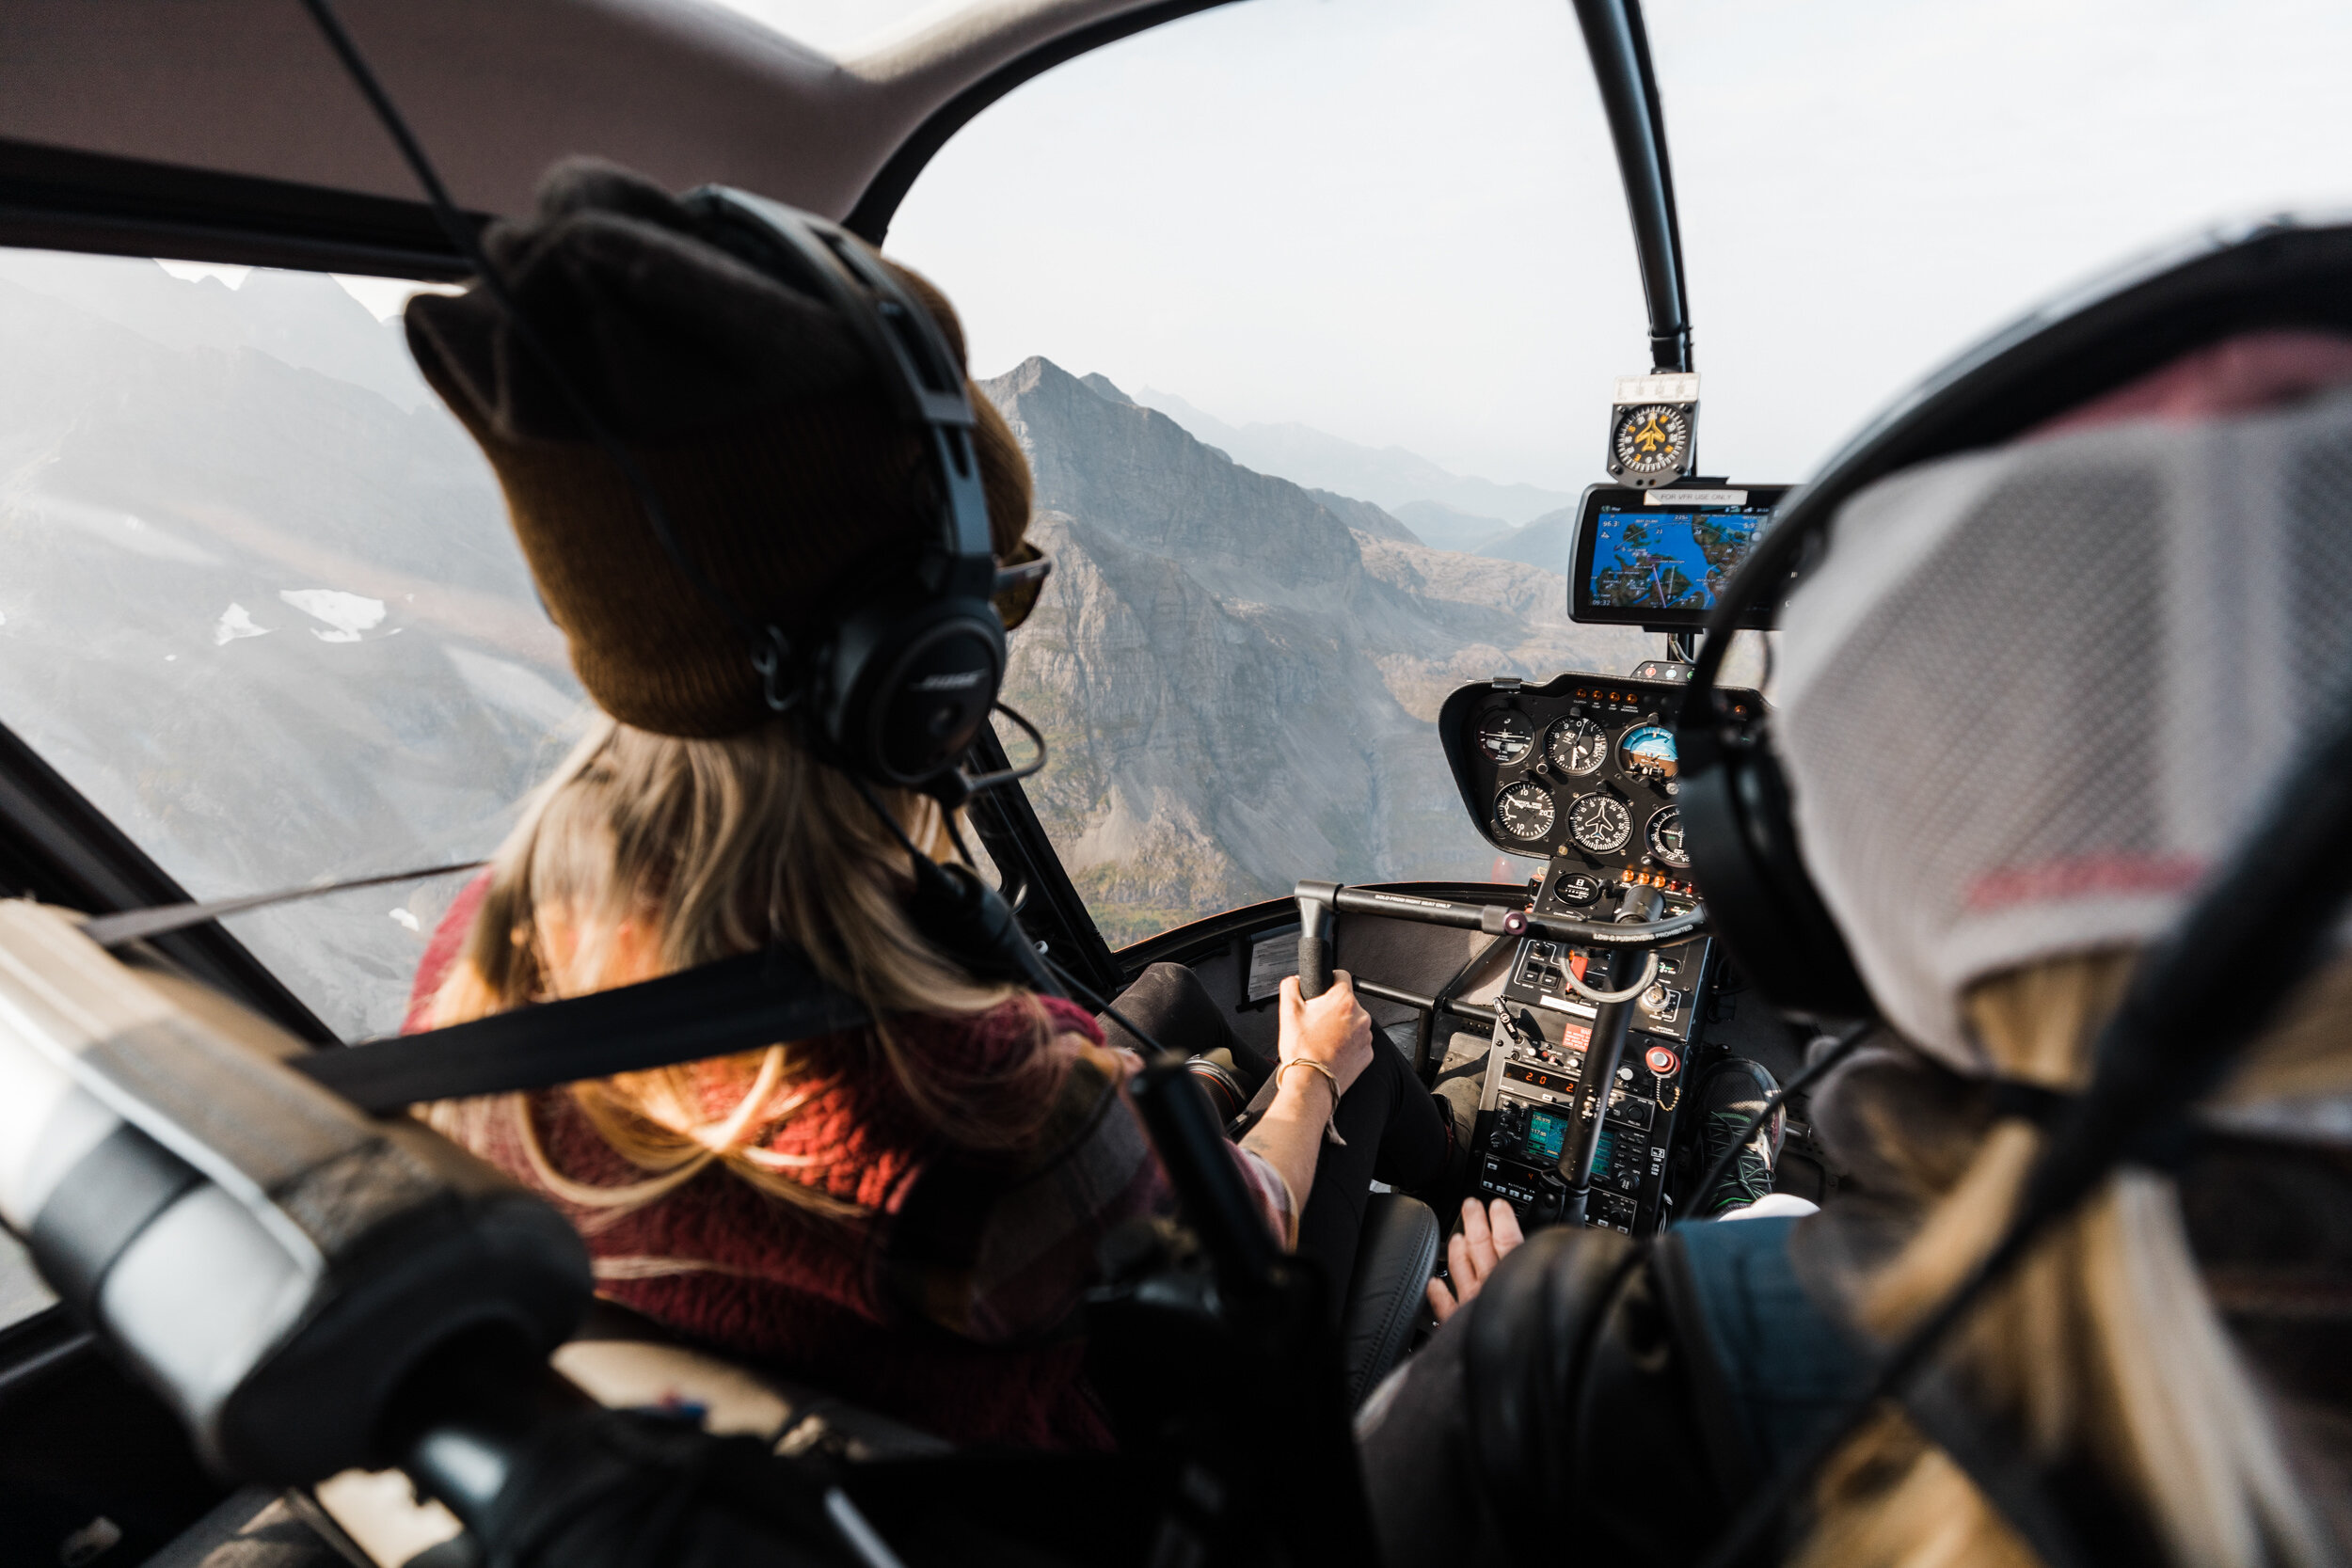 The Hearnes are Wedding Photographers in Alaska | Helicopter Adventure Elopements